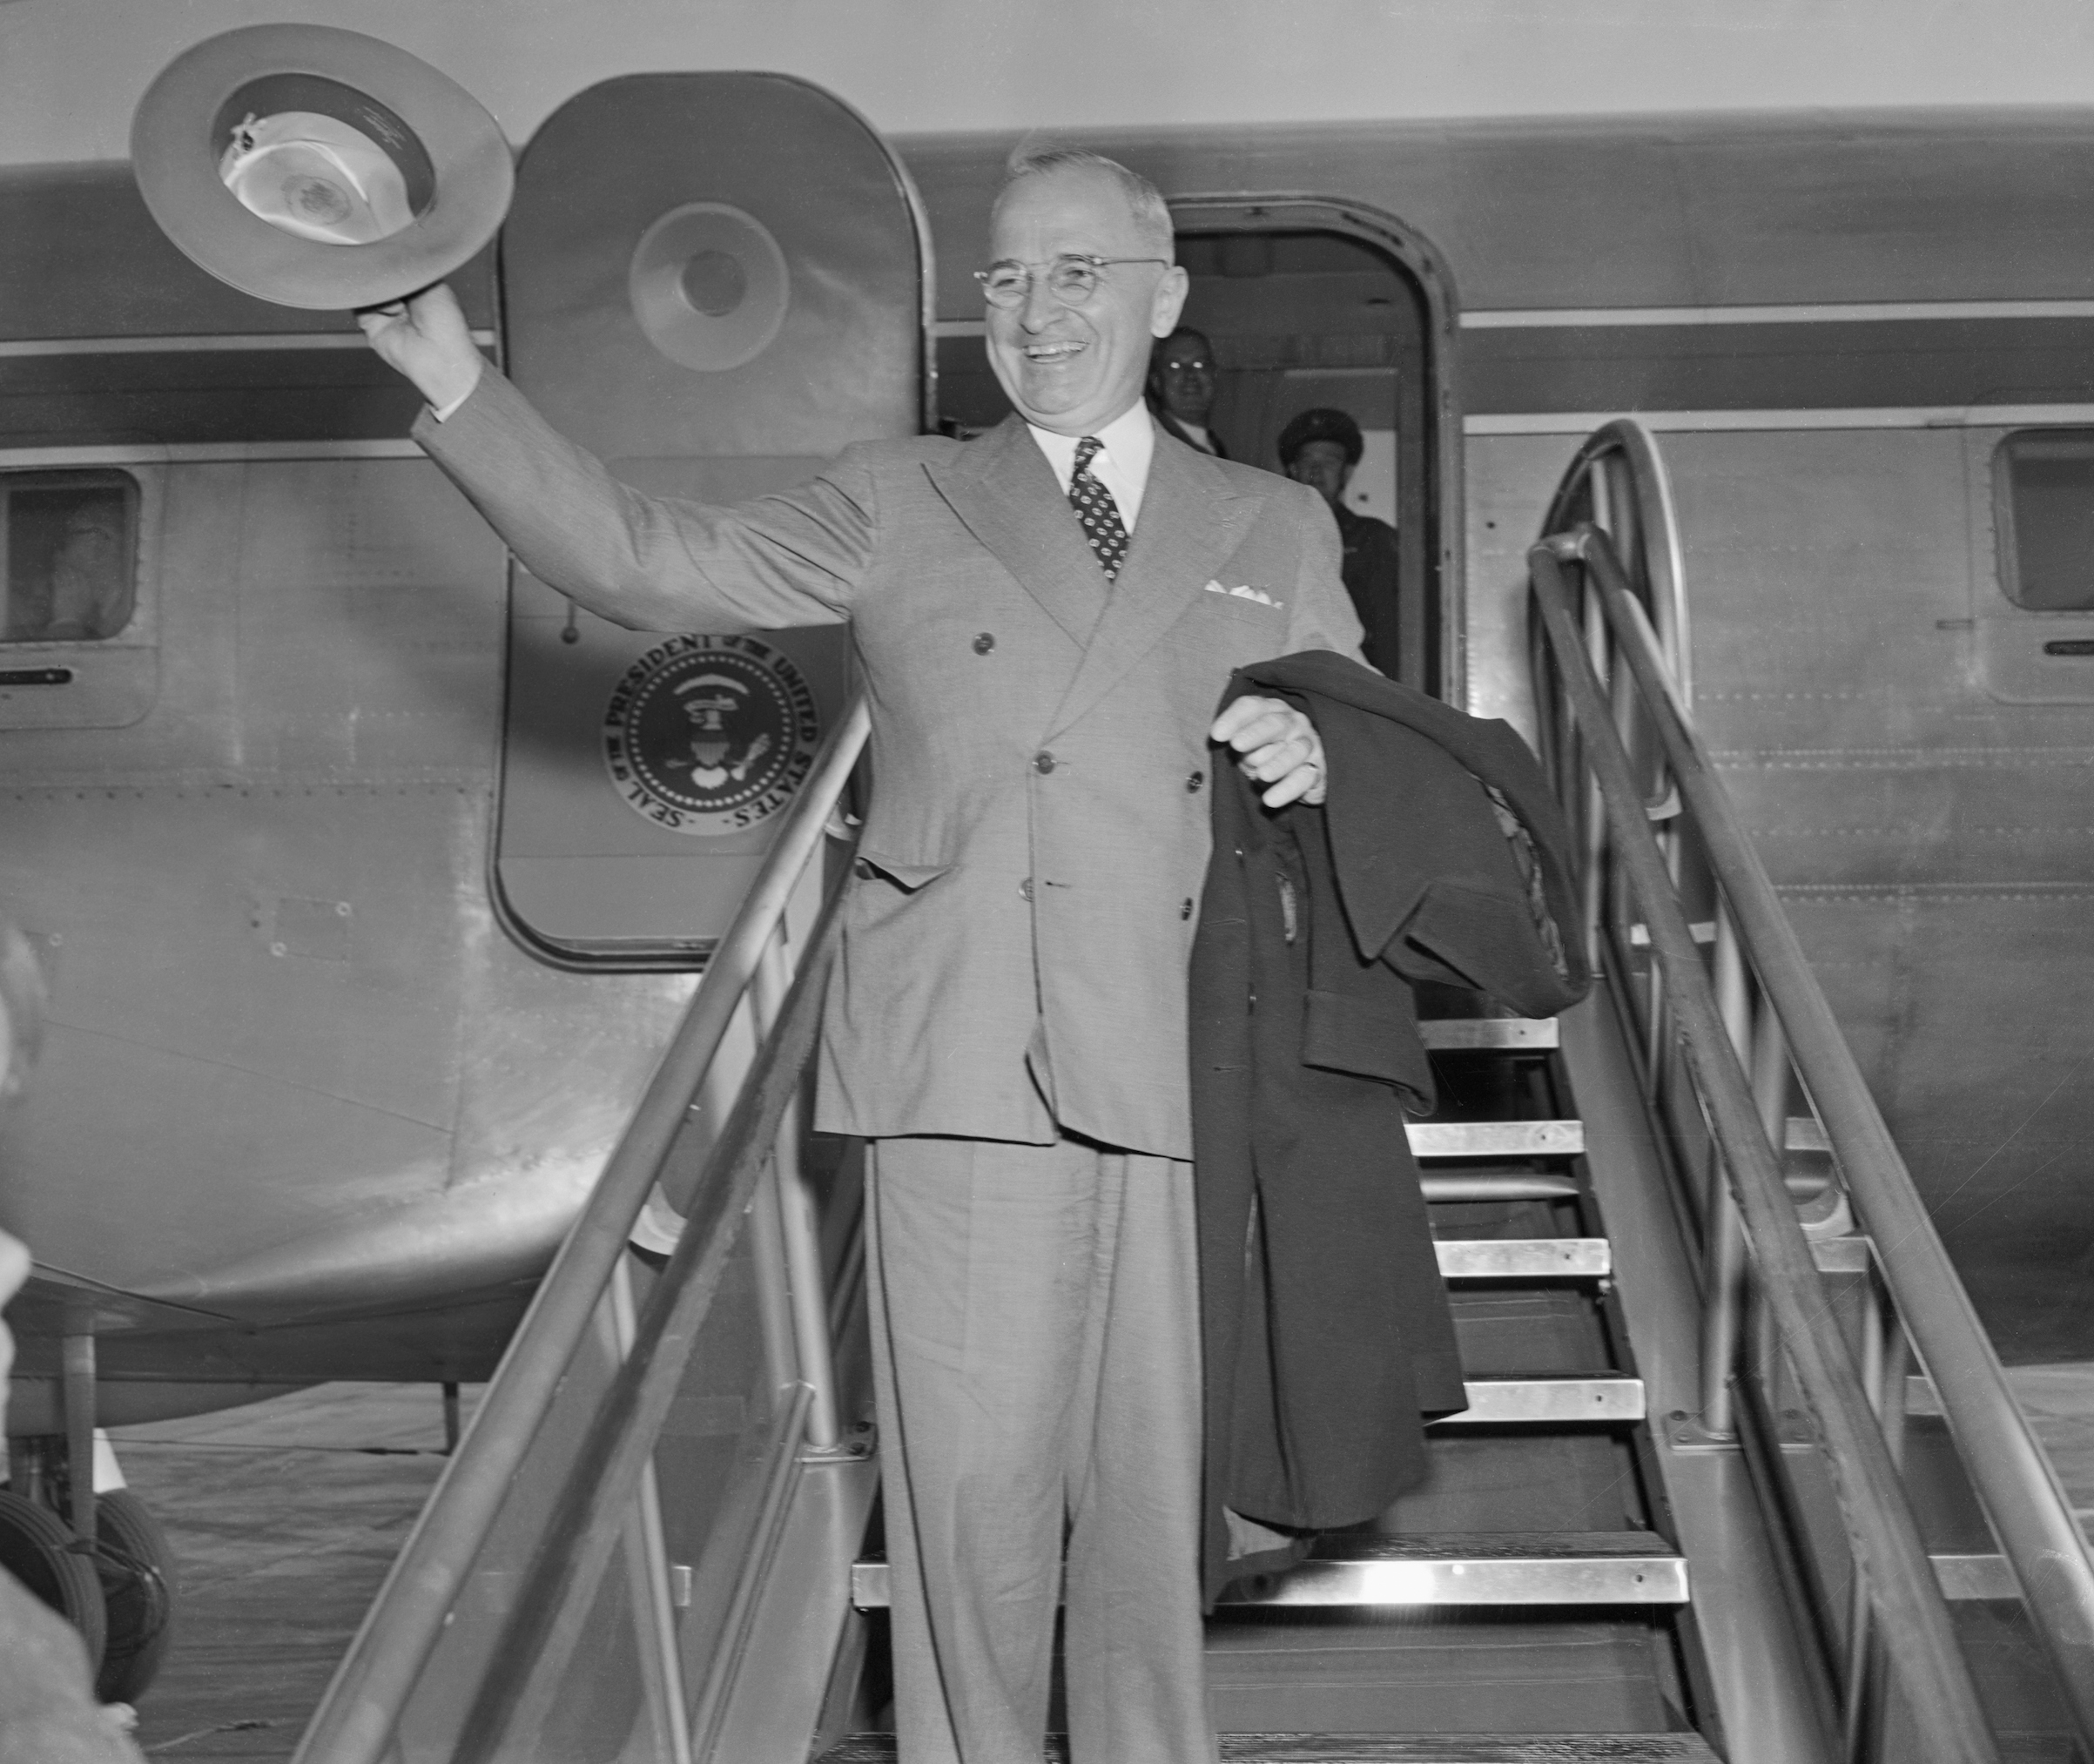 President Truman at Washington National Airport in 1948. (Bettmann/Getty Images)